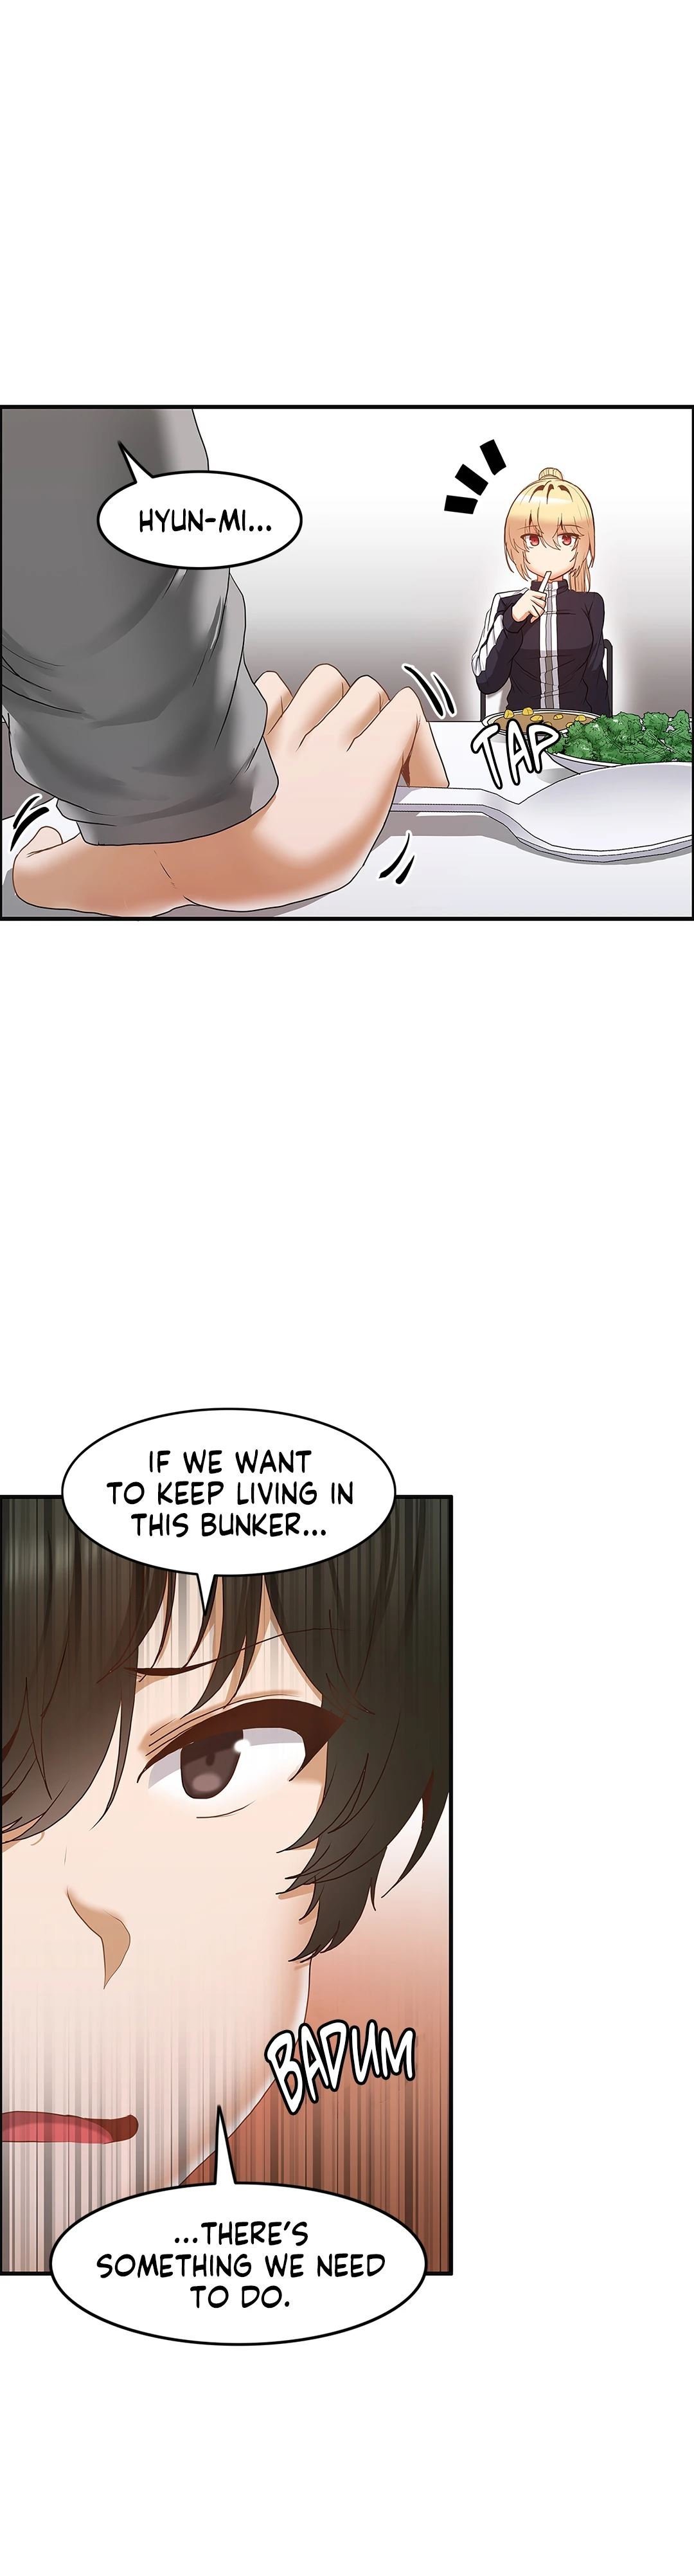 the-two-eves-the-girl-trapped-in-the-wall-chap-3-15